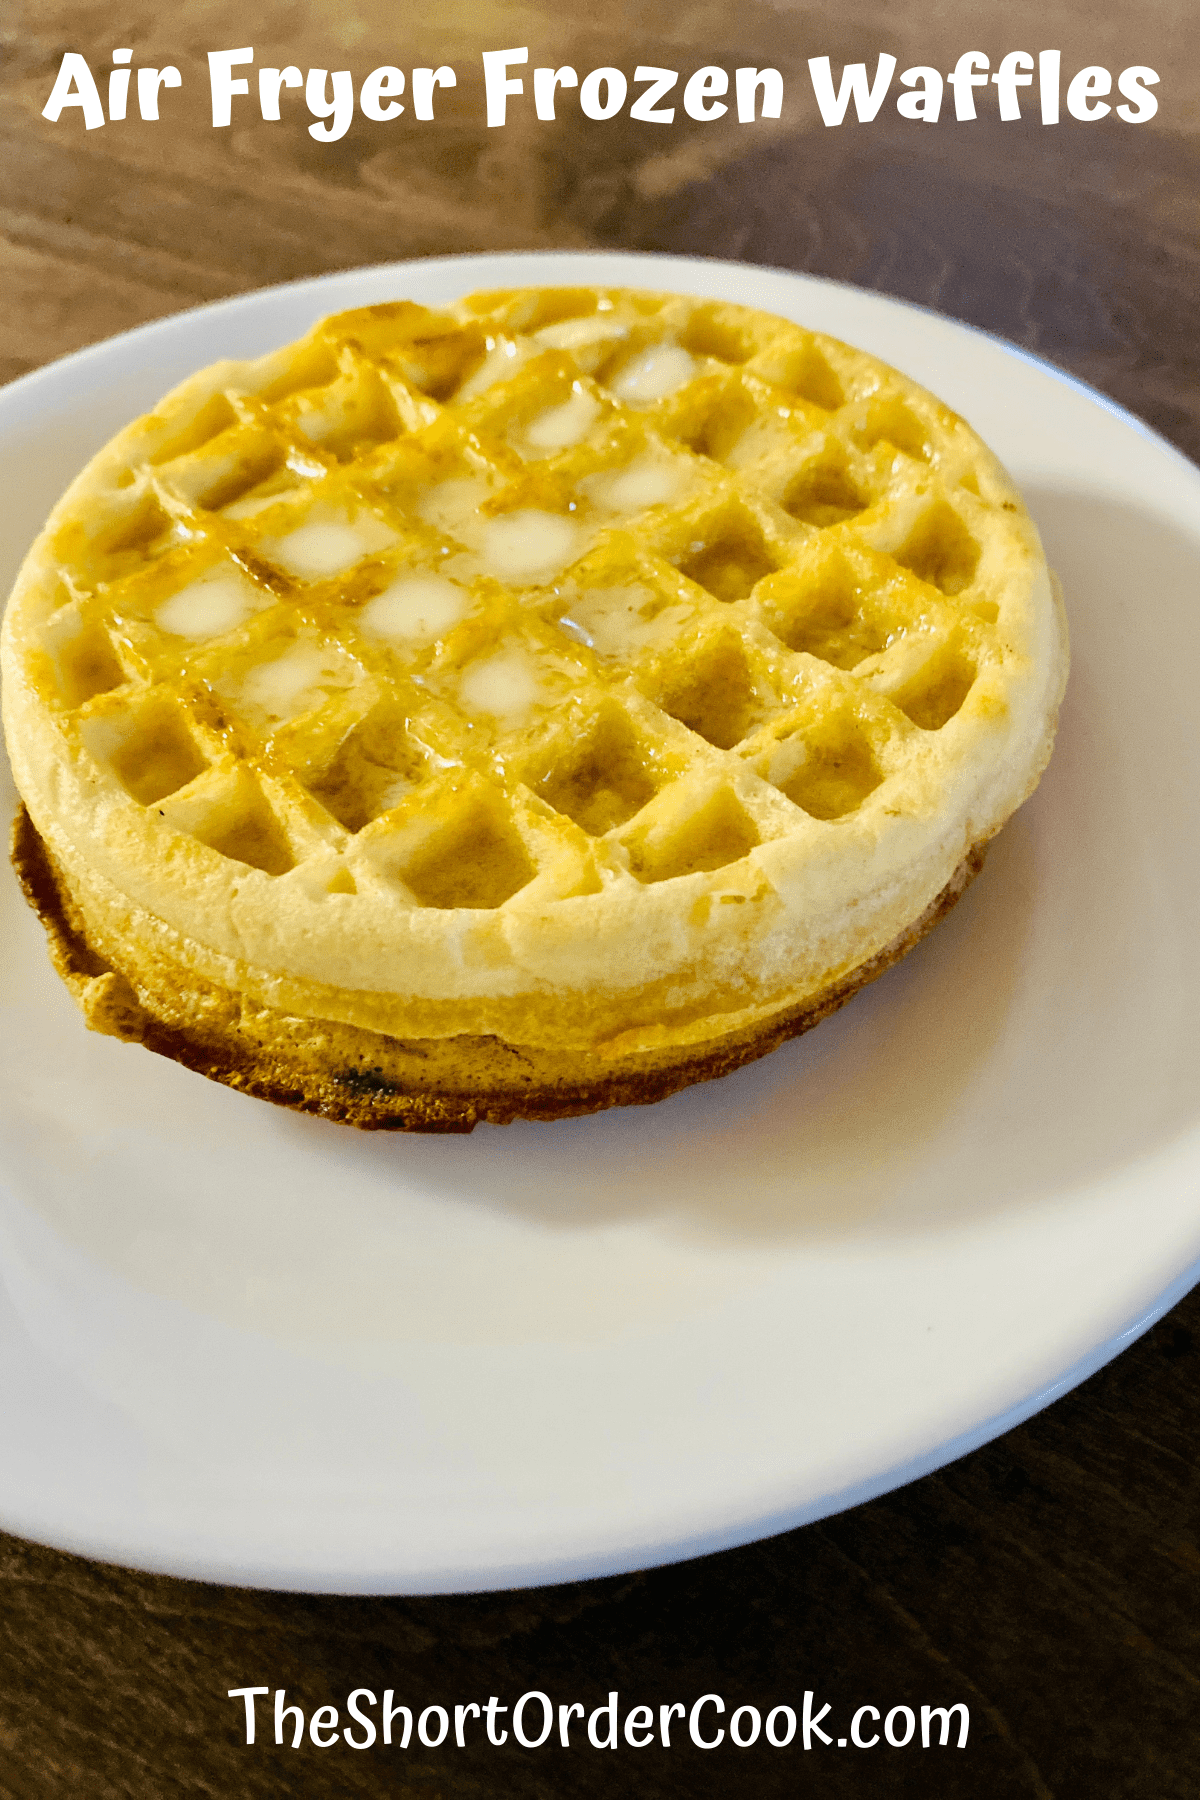 two waffles ready to eat with melting butter on top and plated